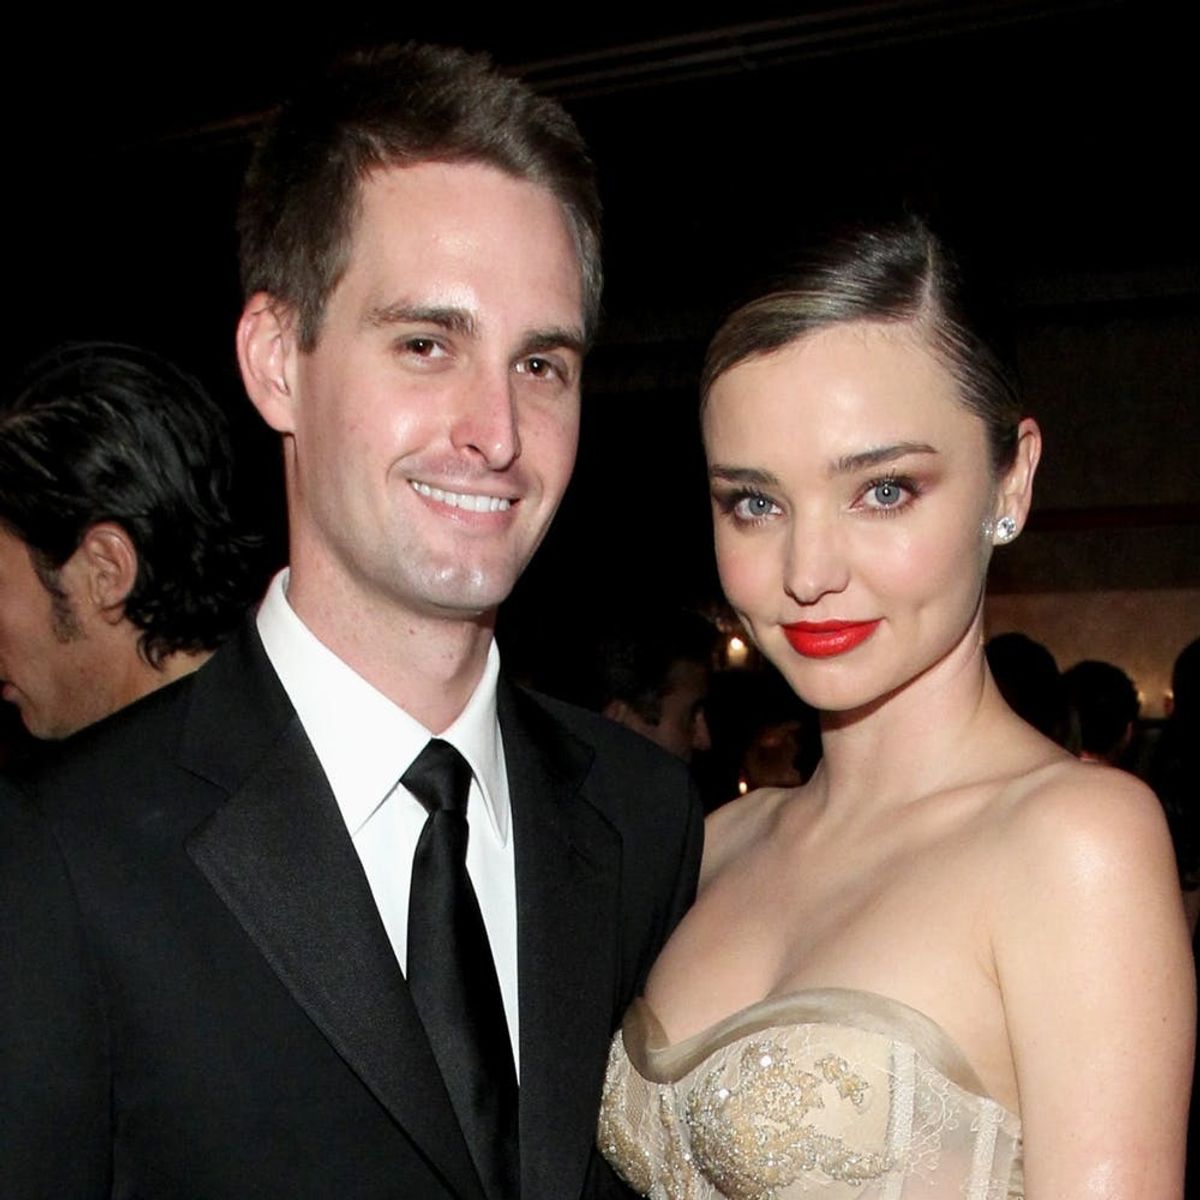 Miranda Kerr Is Pregnant and Expecting a Baby With Evan Spiegel!